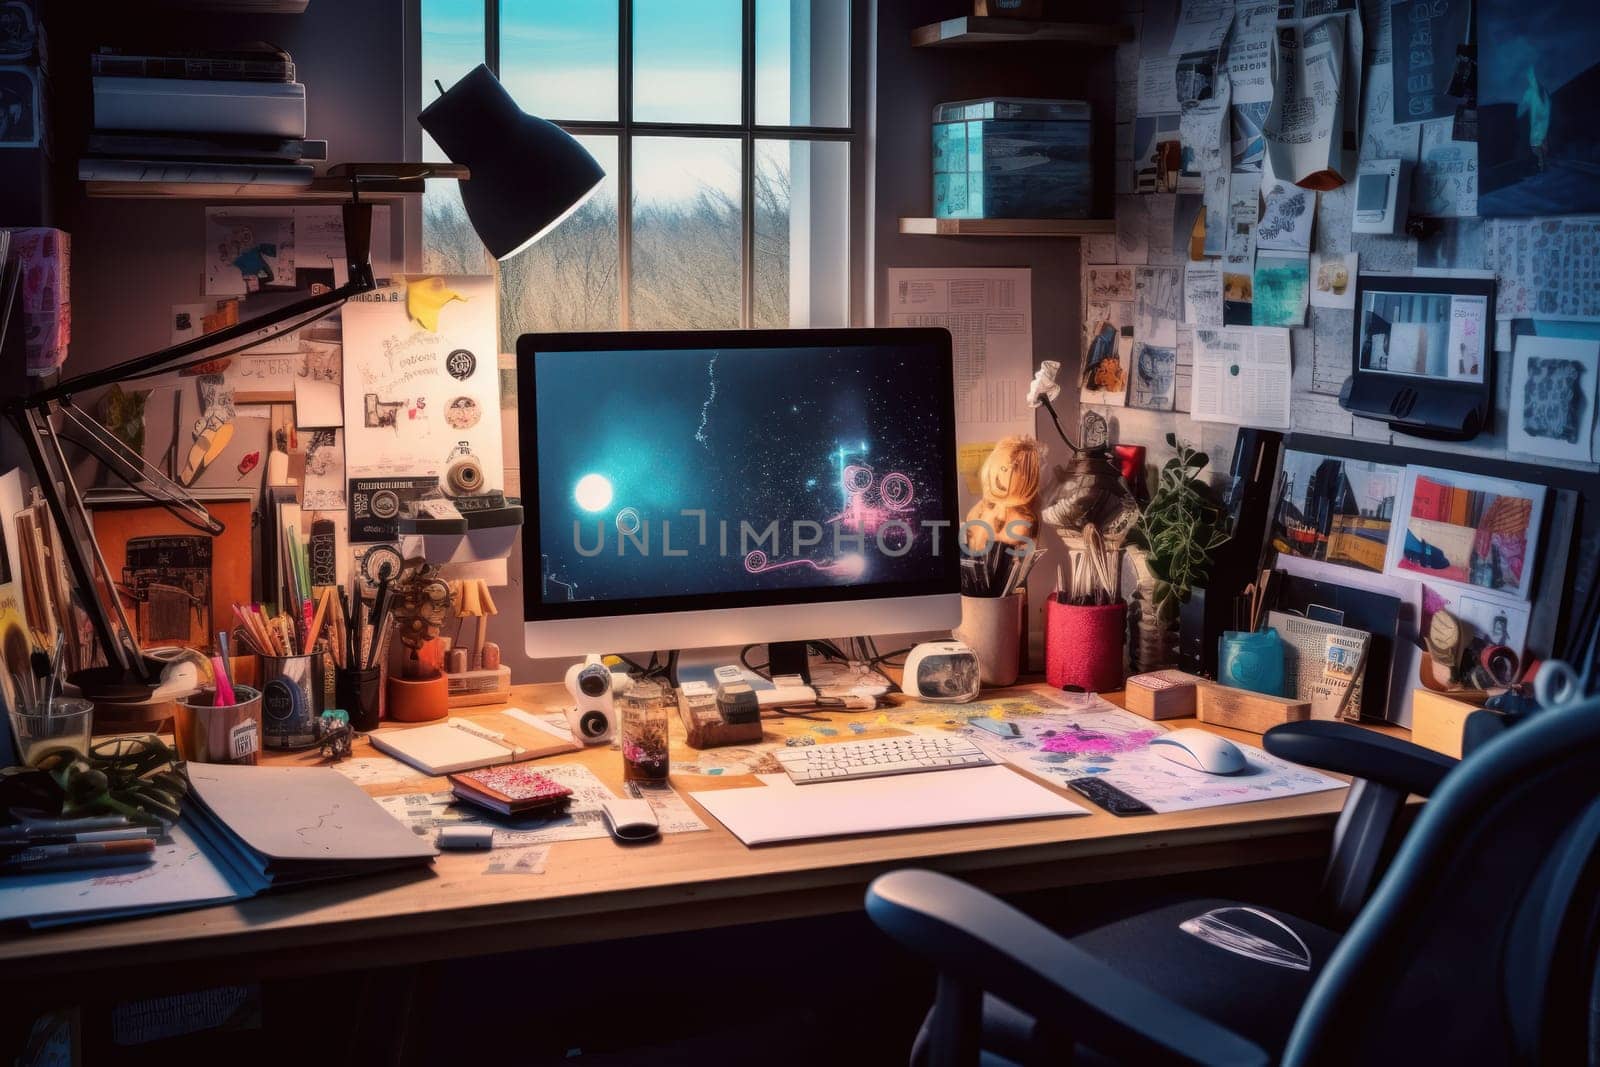 A designer's desk with a computer, designer's working table.